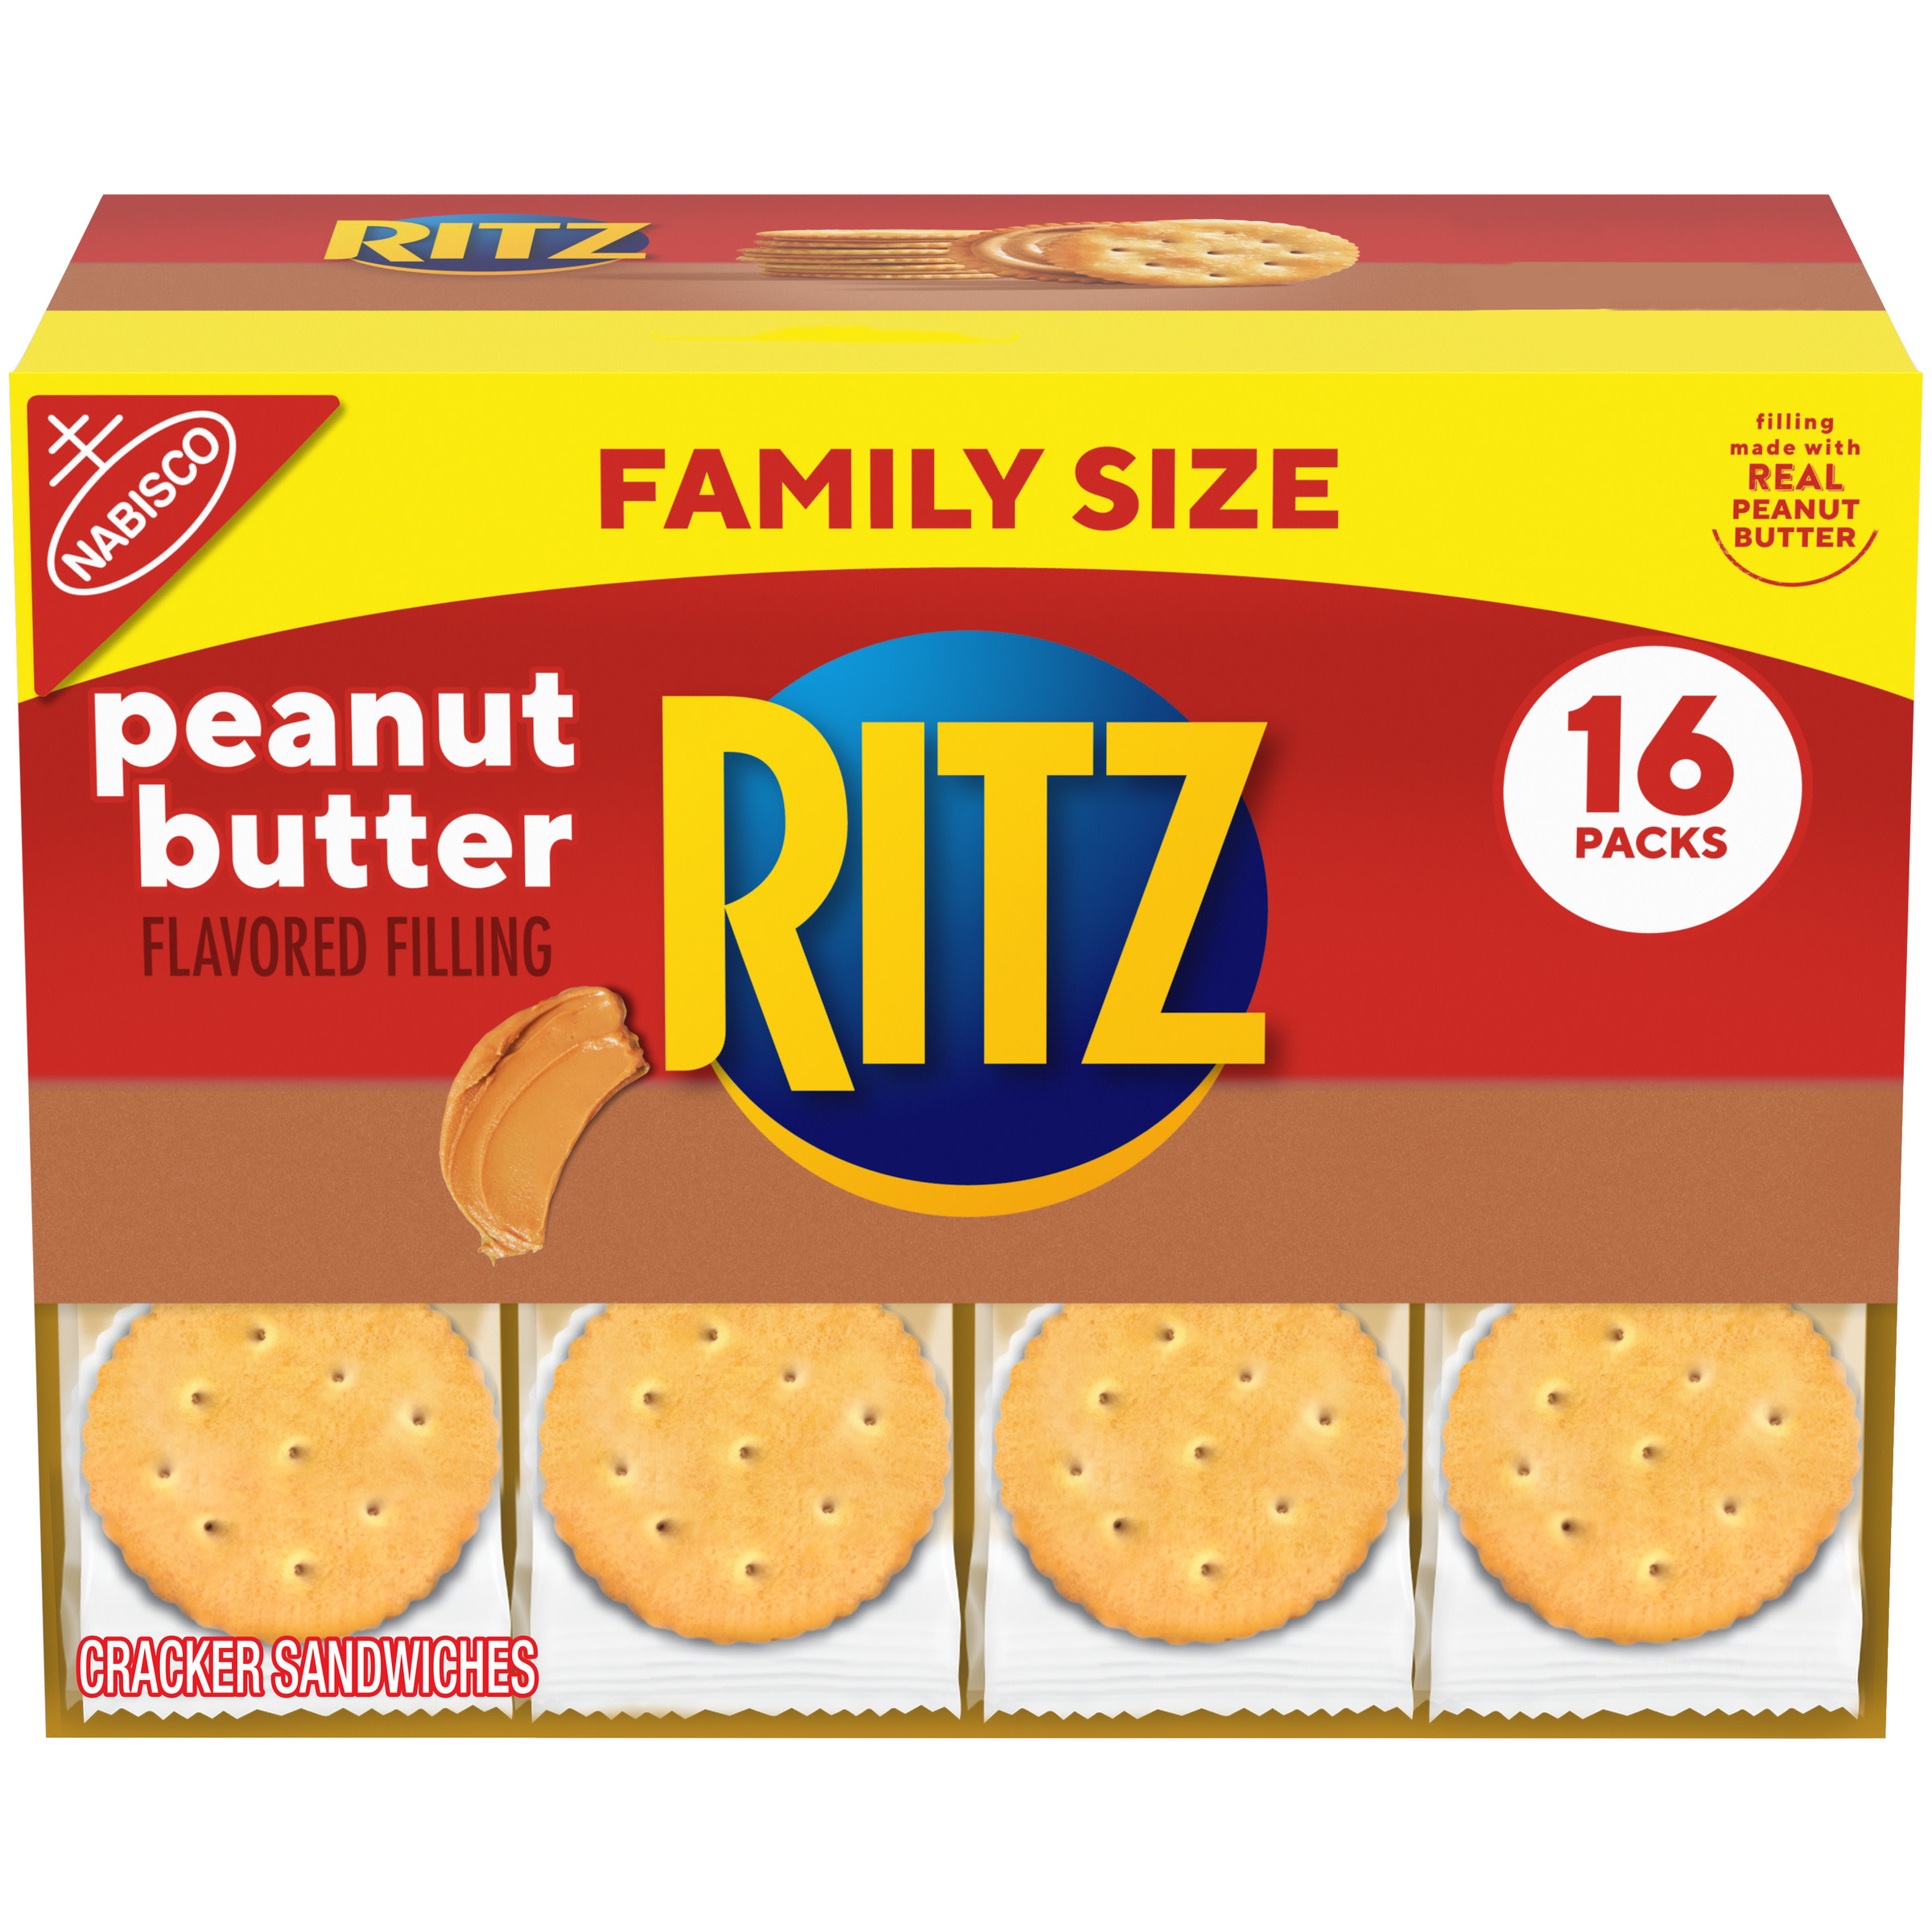 RITZ Peanut Butter Sandwich Crackers, Family Size, 16 - 1.38 oz Packs - image 1 of 13